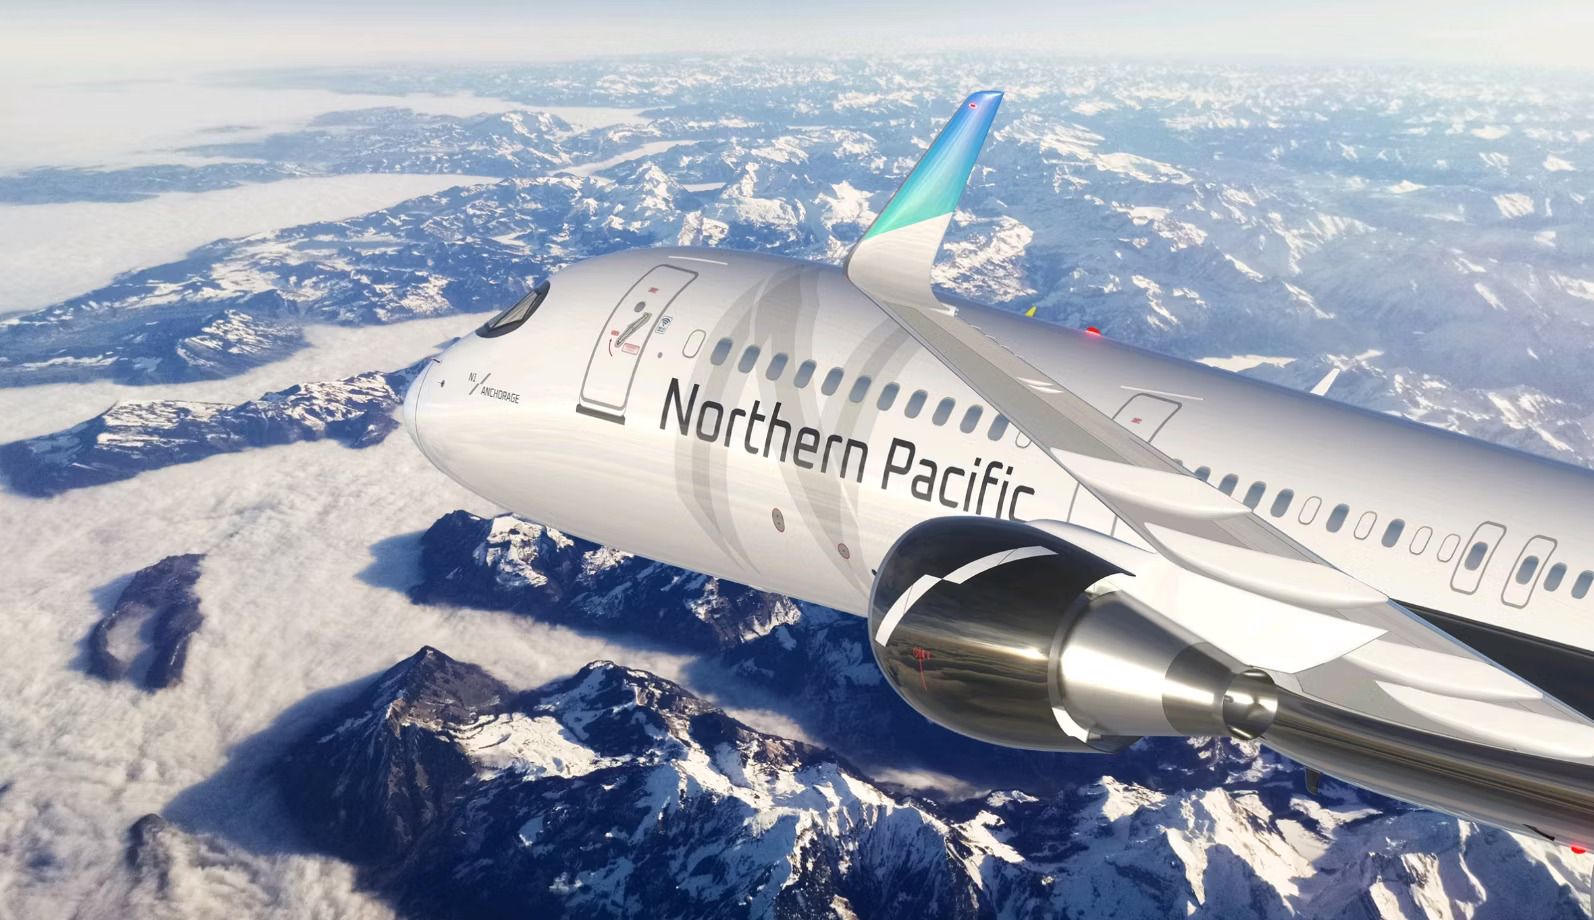 A Northern Pacific Airways promotional photo of its Boeing 757 aircraft